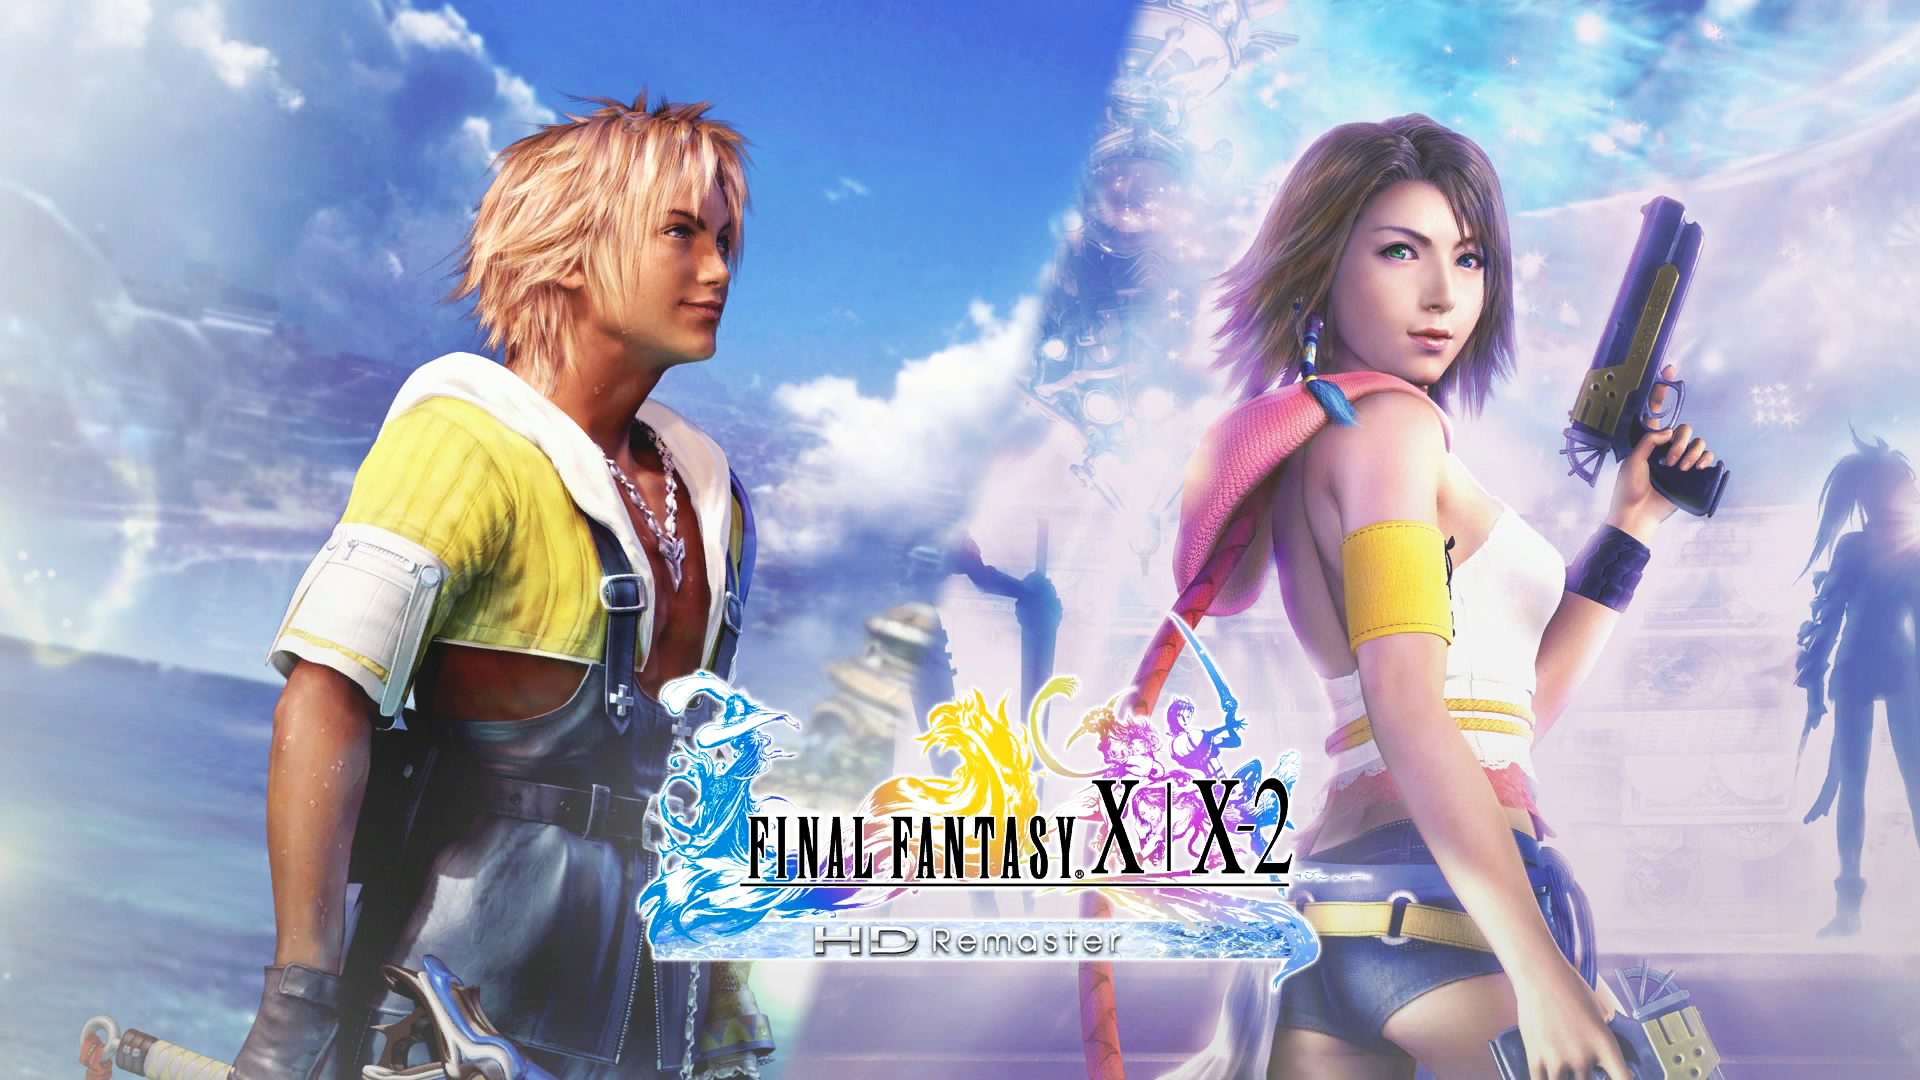 Final Fantasy X X 2 Hd Remaster Free Download Crohasit Download Pc Games For Free